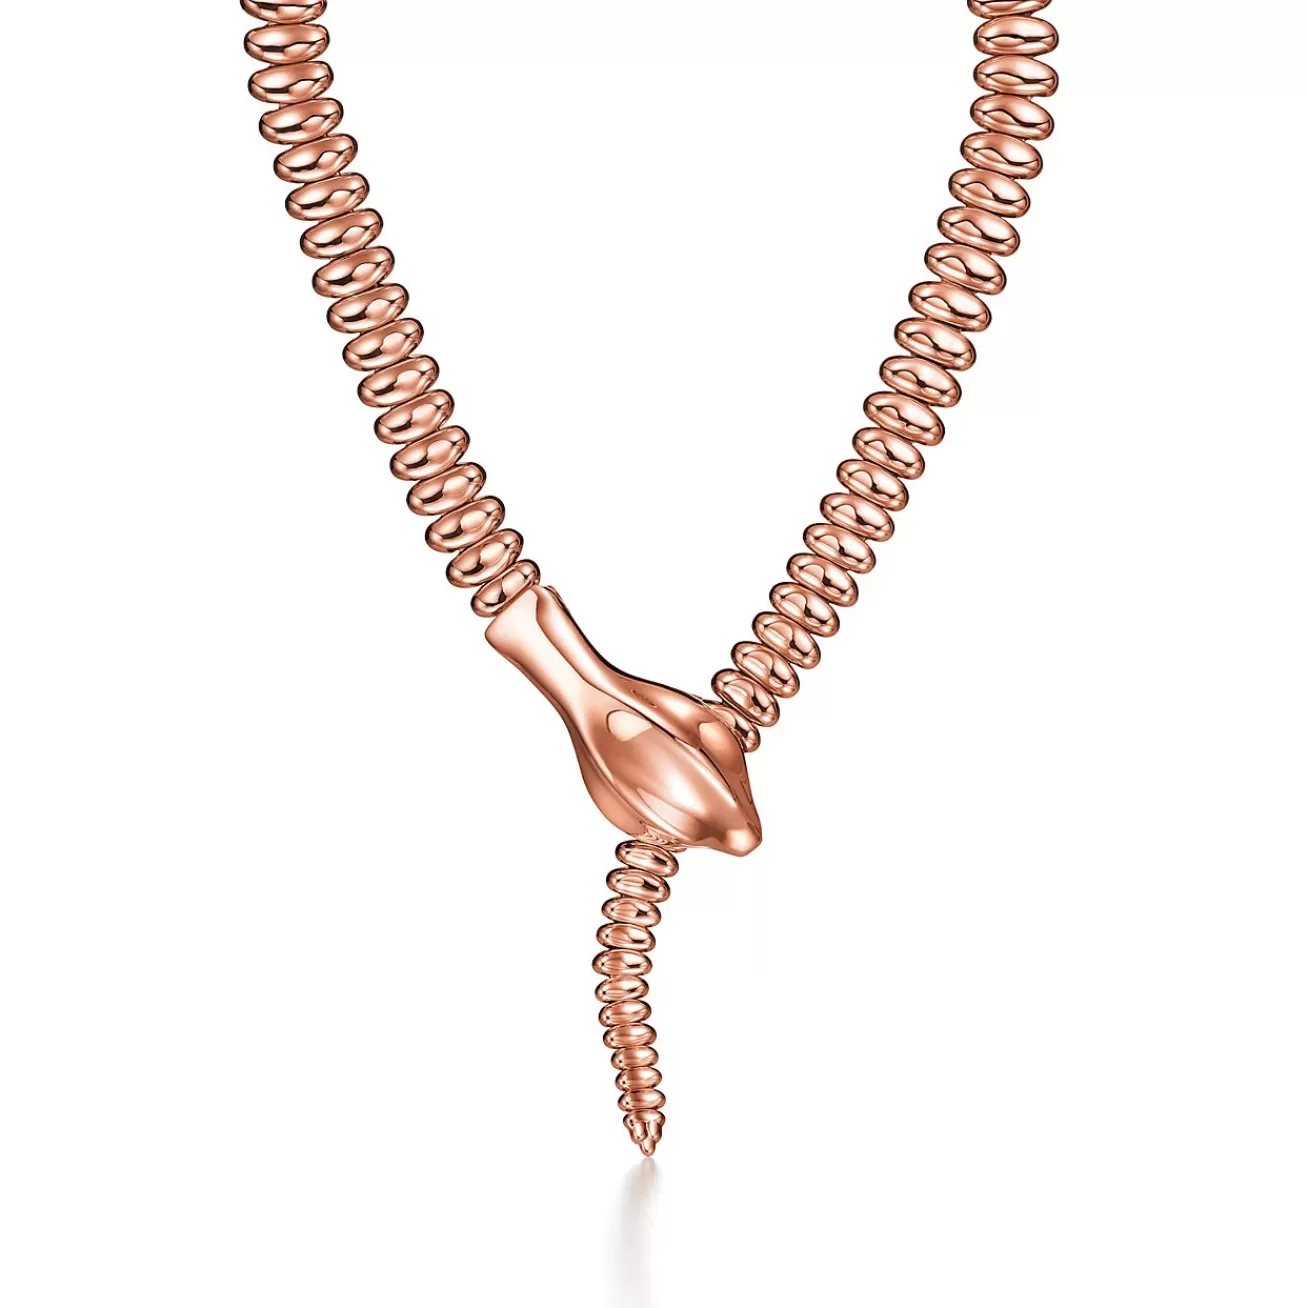 Tiffany & Co. Elsa Peretti® Snake Necklace in Rose Gold | ^ Necklaces & Pendants | Rose Gold Jewelry